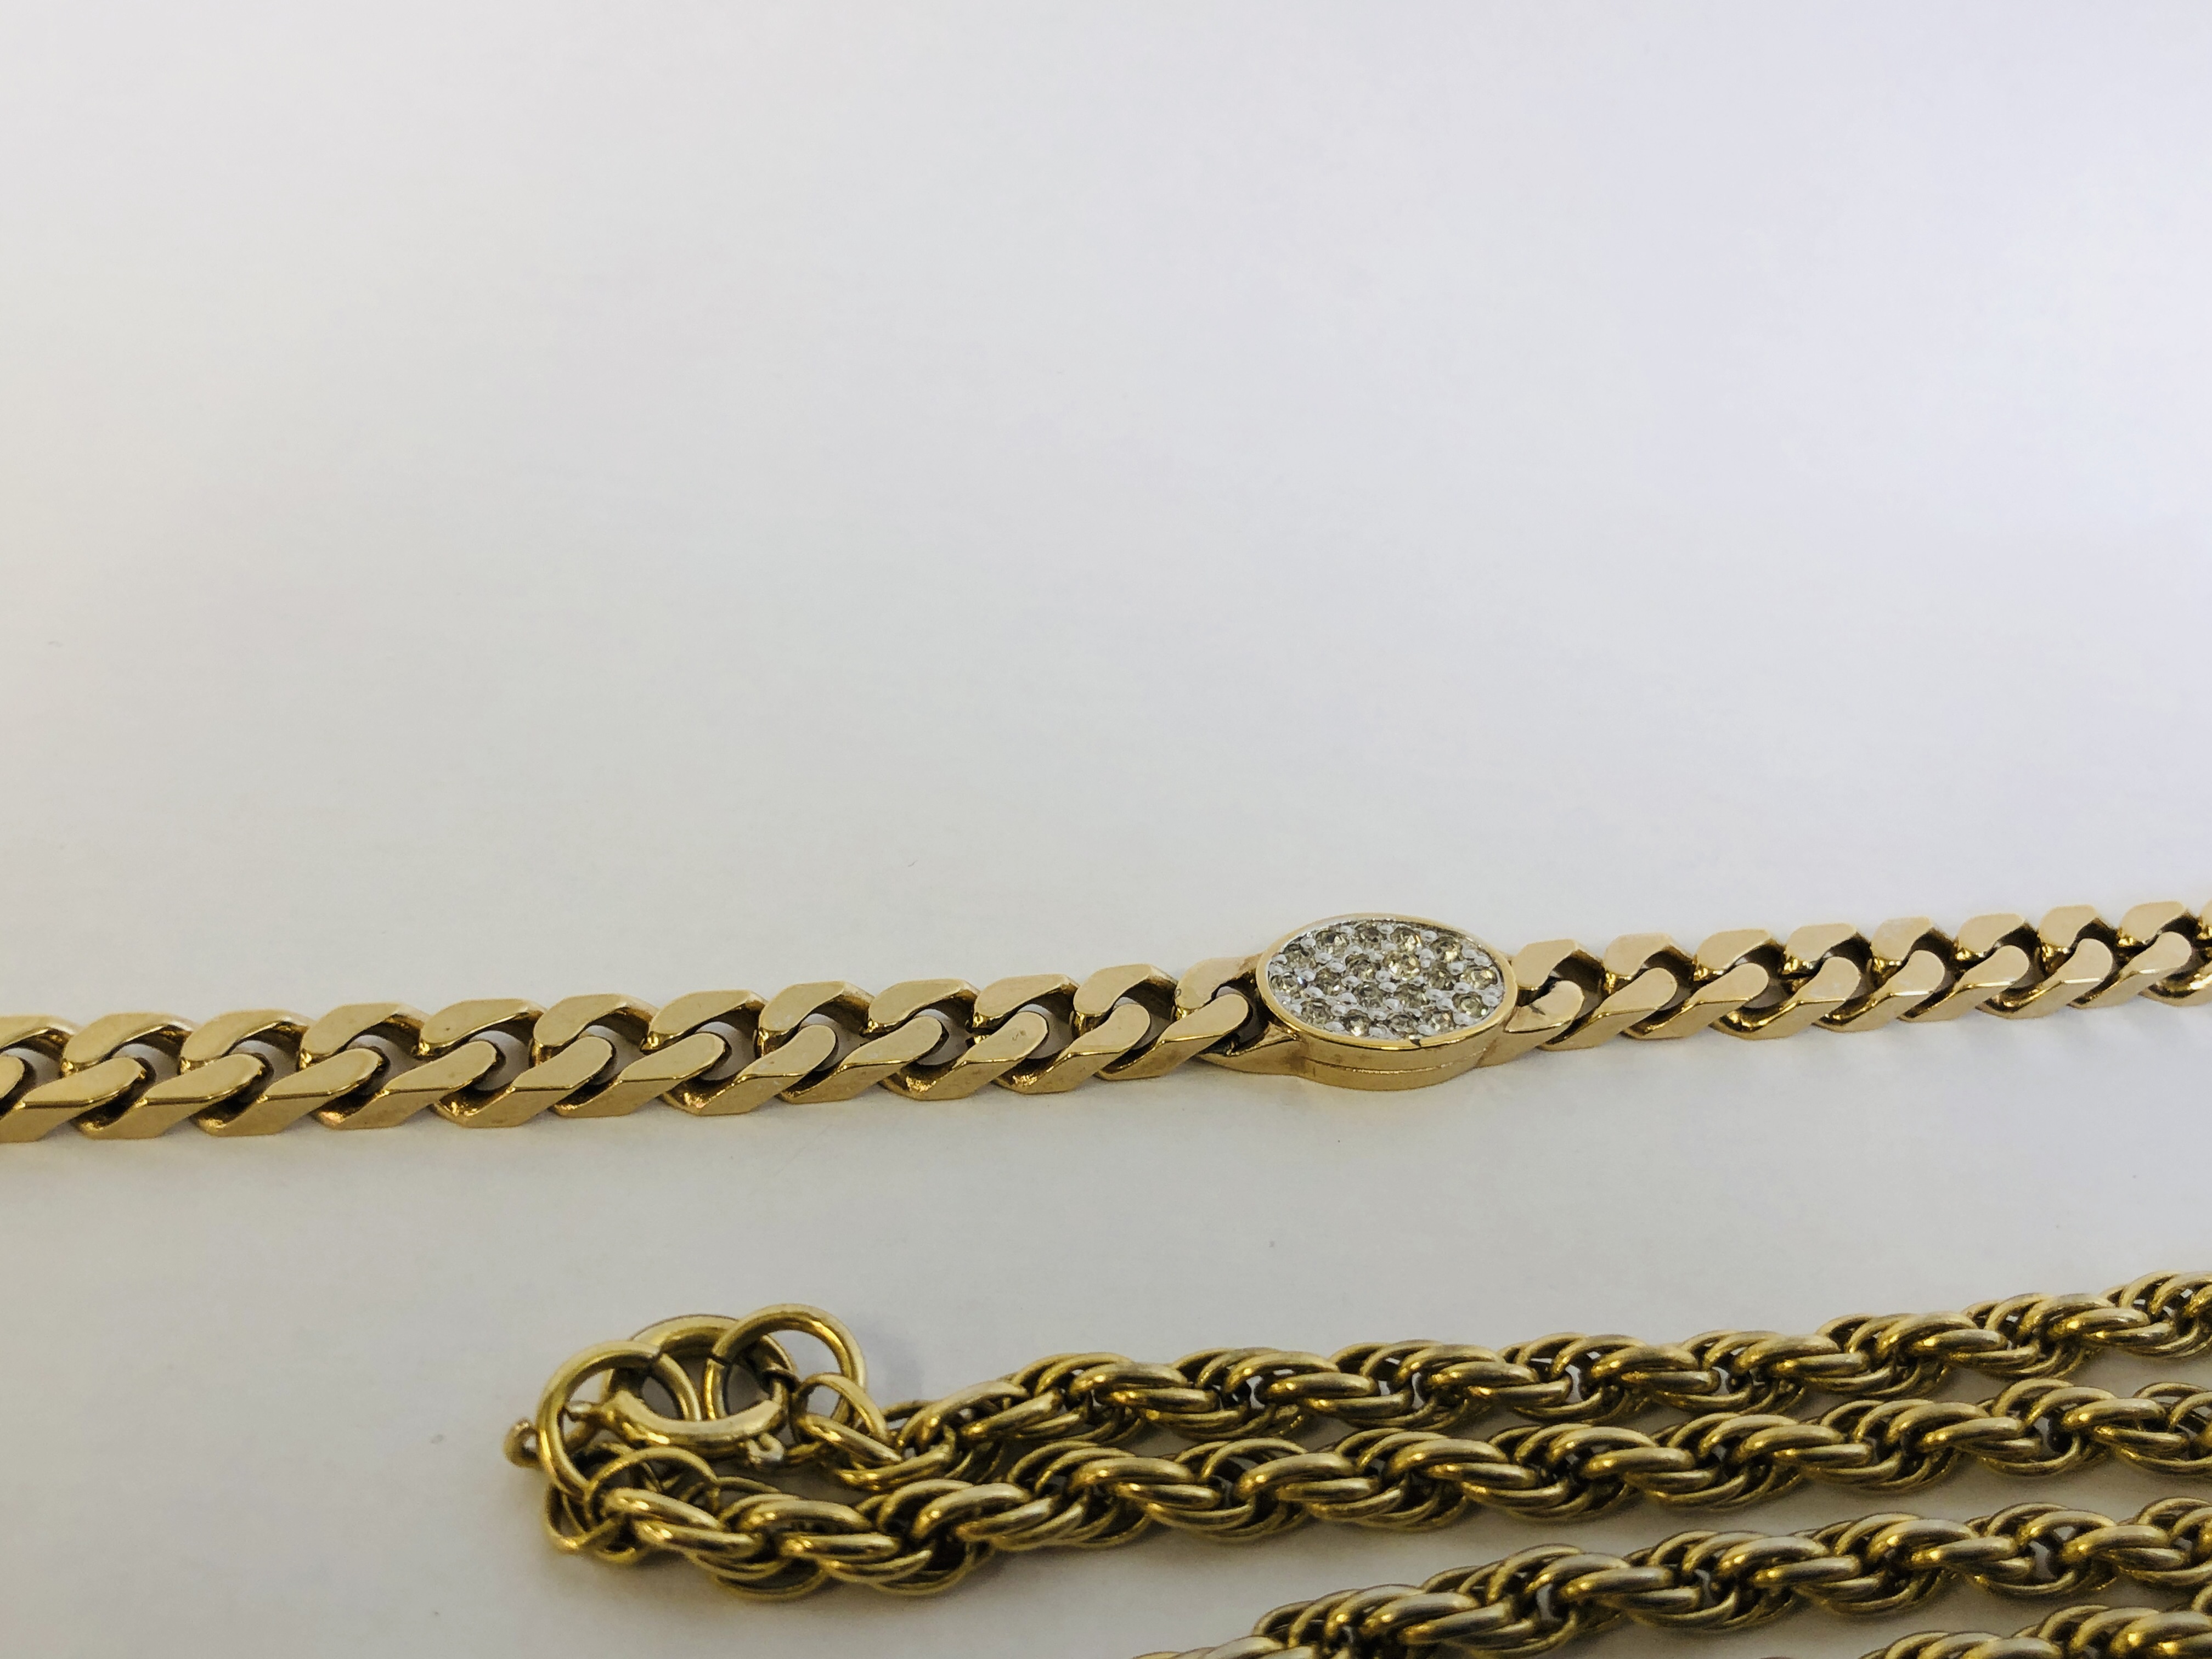 A GOLD TONE COSTUME BRACELET MARKED "PANETTA" ALONG WITH AN UNMARKED ROPE TWIST NECKLACE. - Image 6 of 13